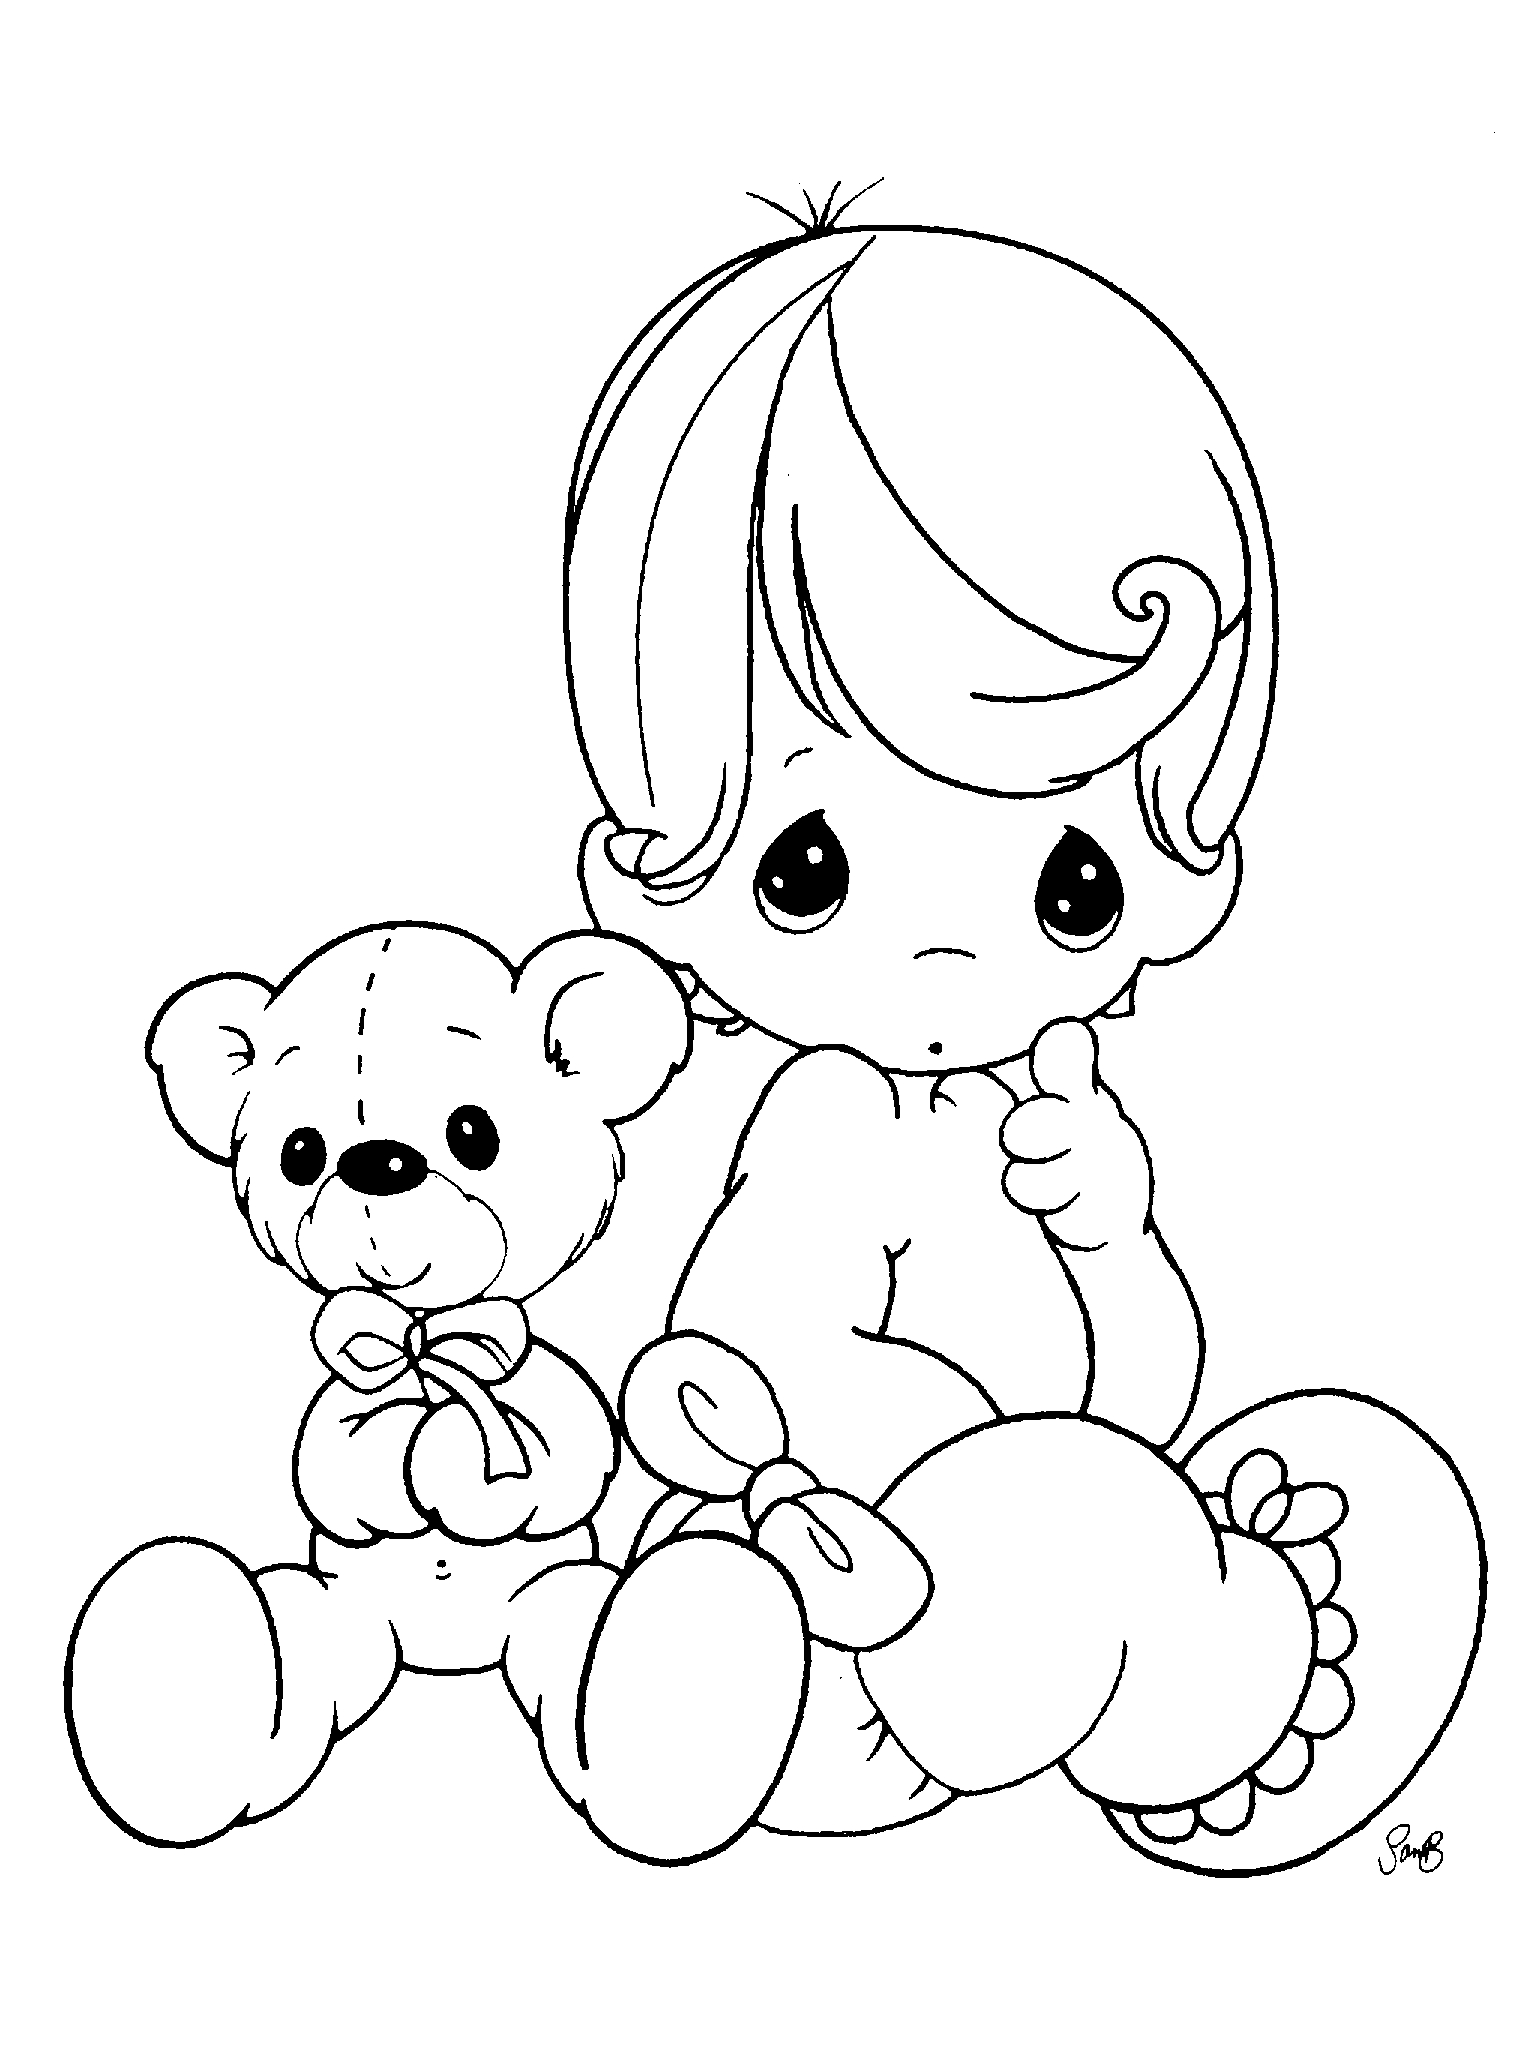 Little Boy Coloring Pages Printable Coloring Pages Coloring Pages Freeintableecious Moments For Kids